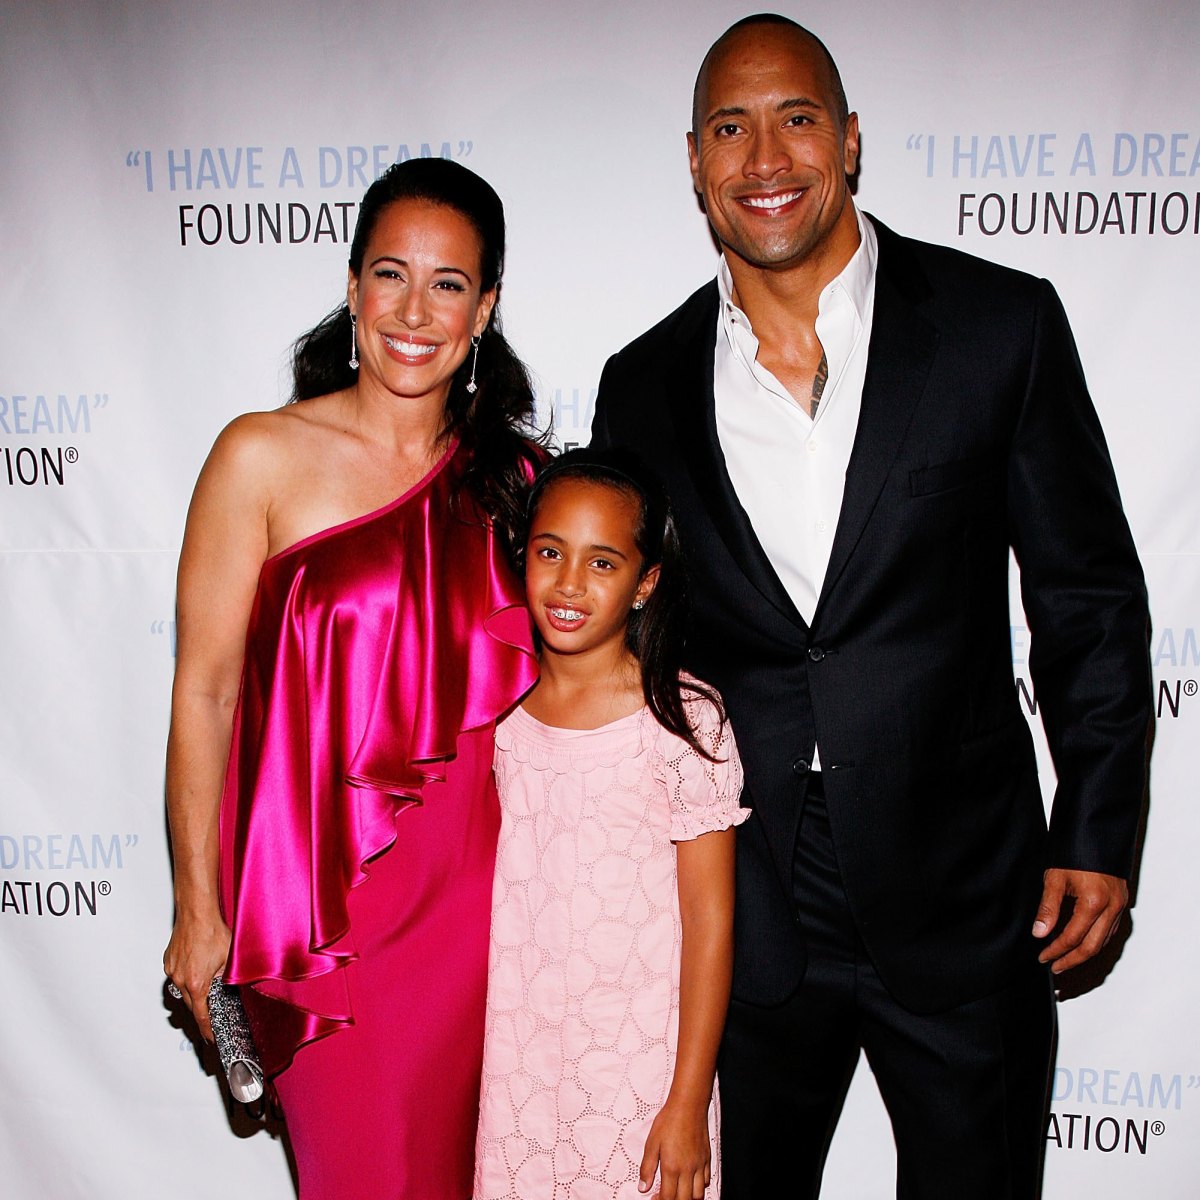 See The Rock’s Lovely Daughter Gearing Up For Her Debut In The Wrestling World, Continuing The Legacy Of Her Father – The Rock